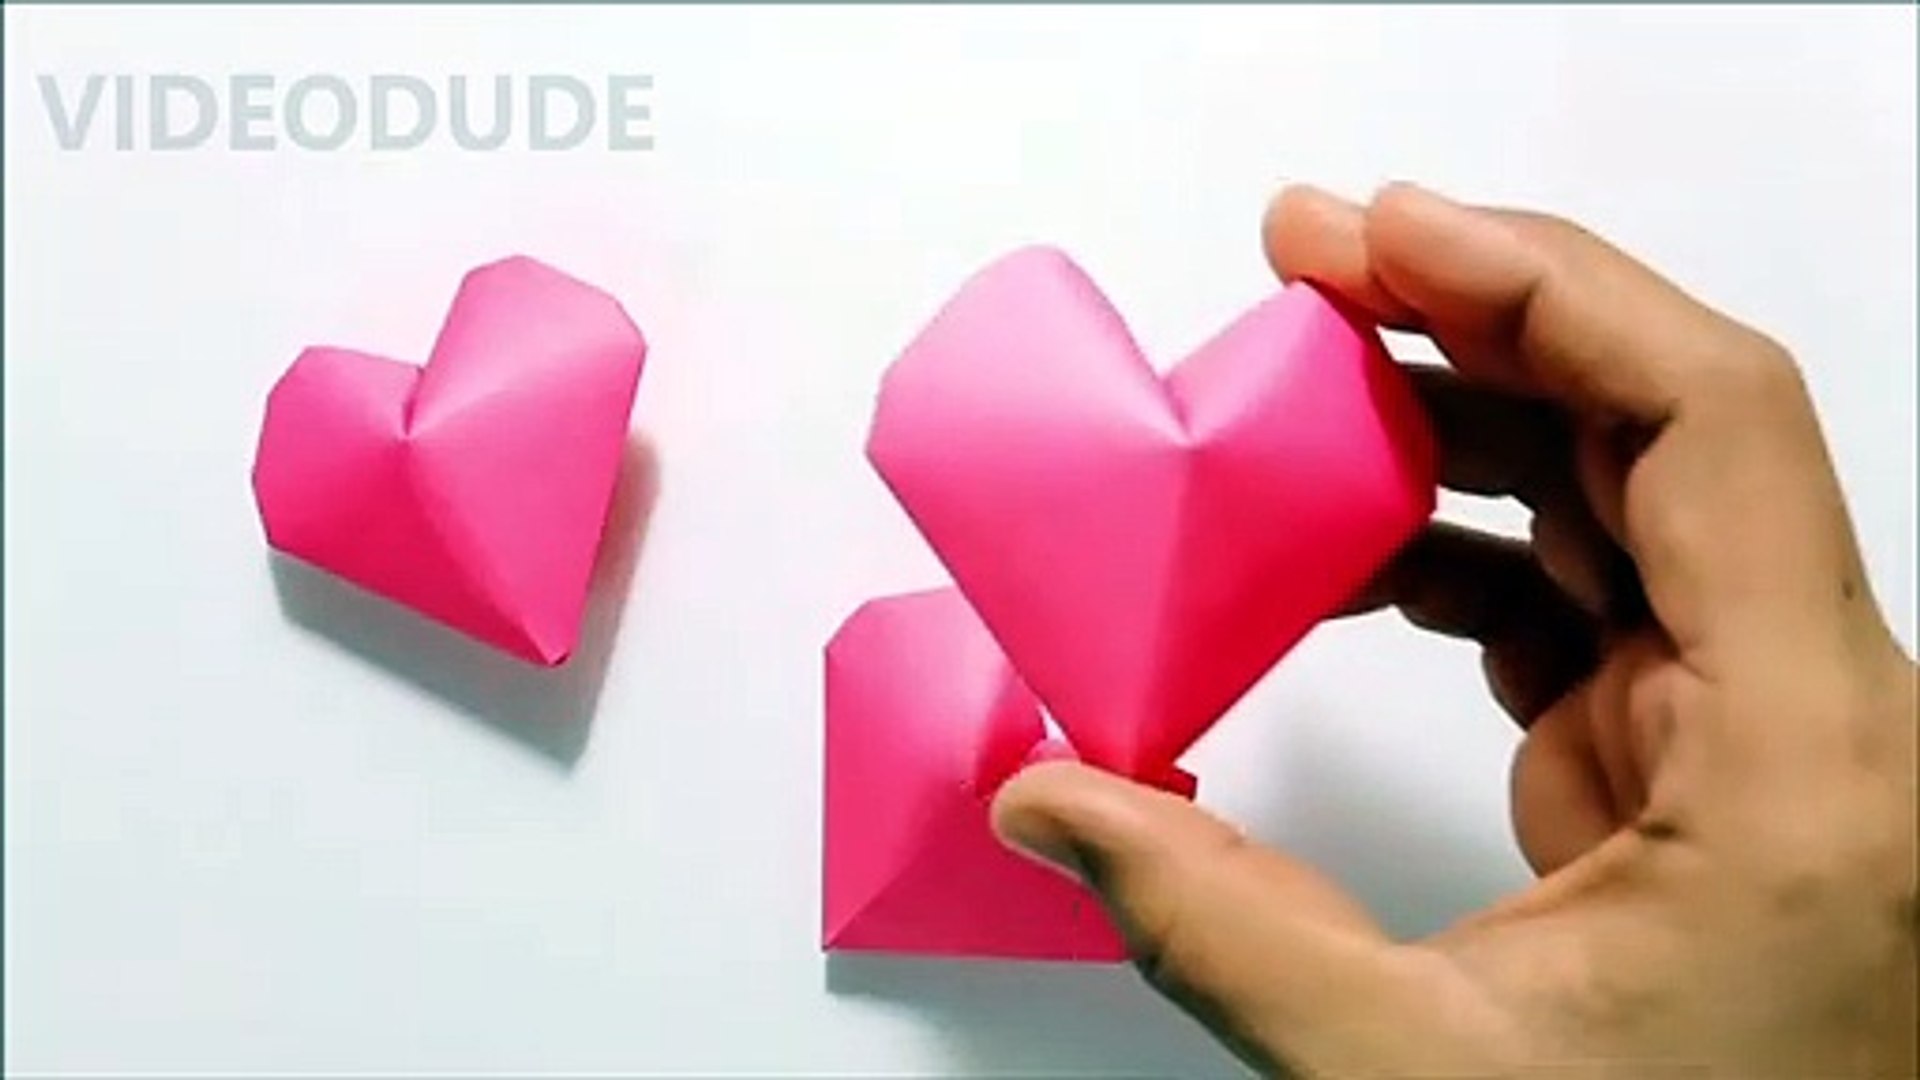 How To Make 3D Heart, Origami Easy 3D Heart, Origami 3D Paper Heart